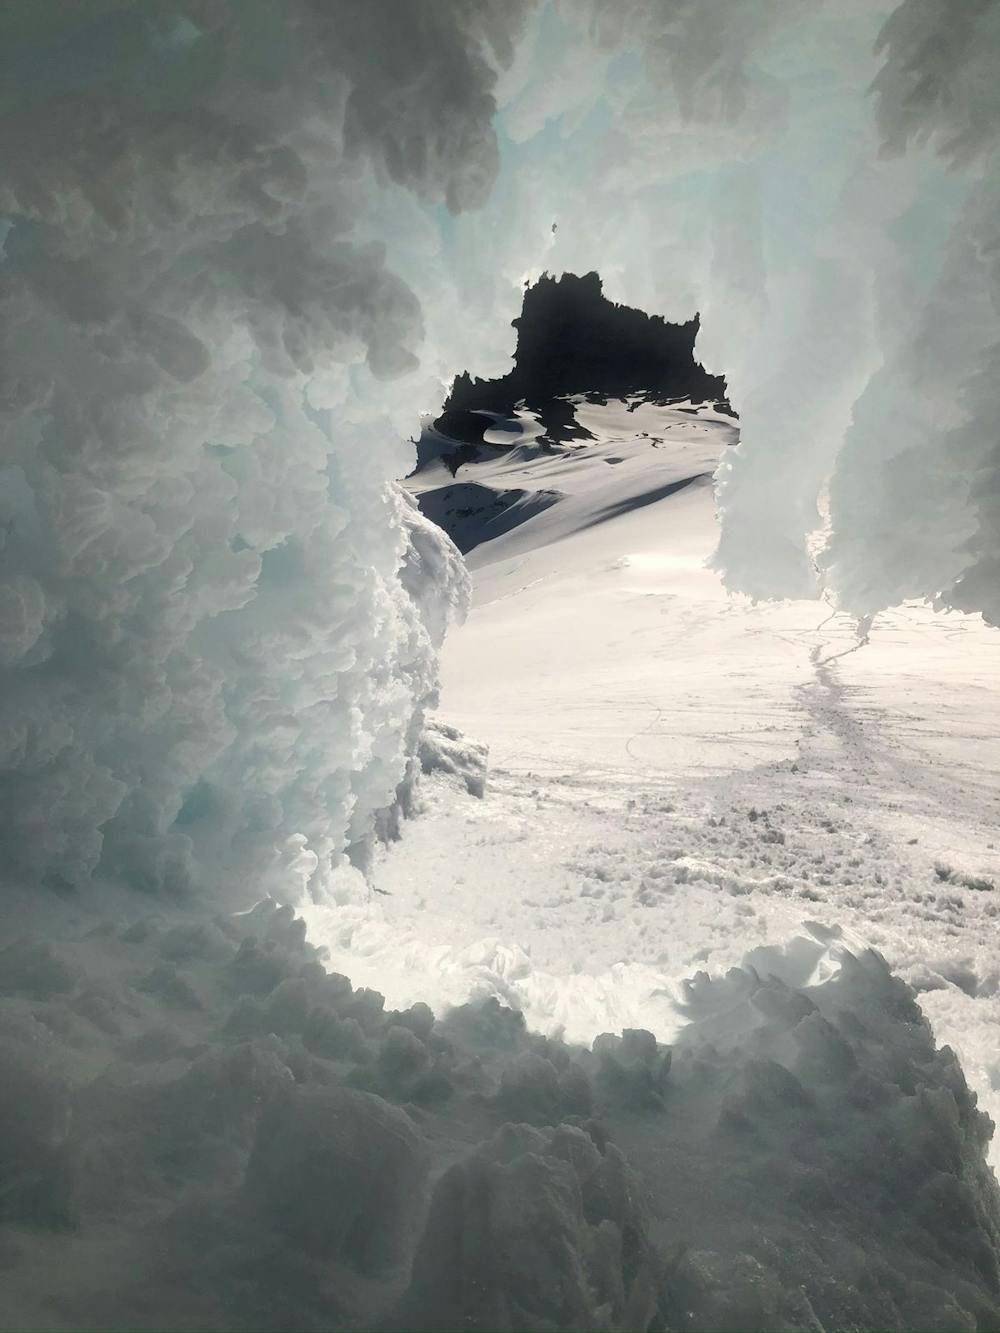 Amusing shapes in the ice create a cave